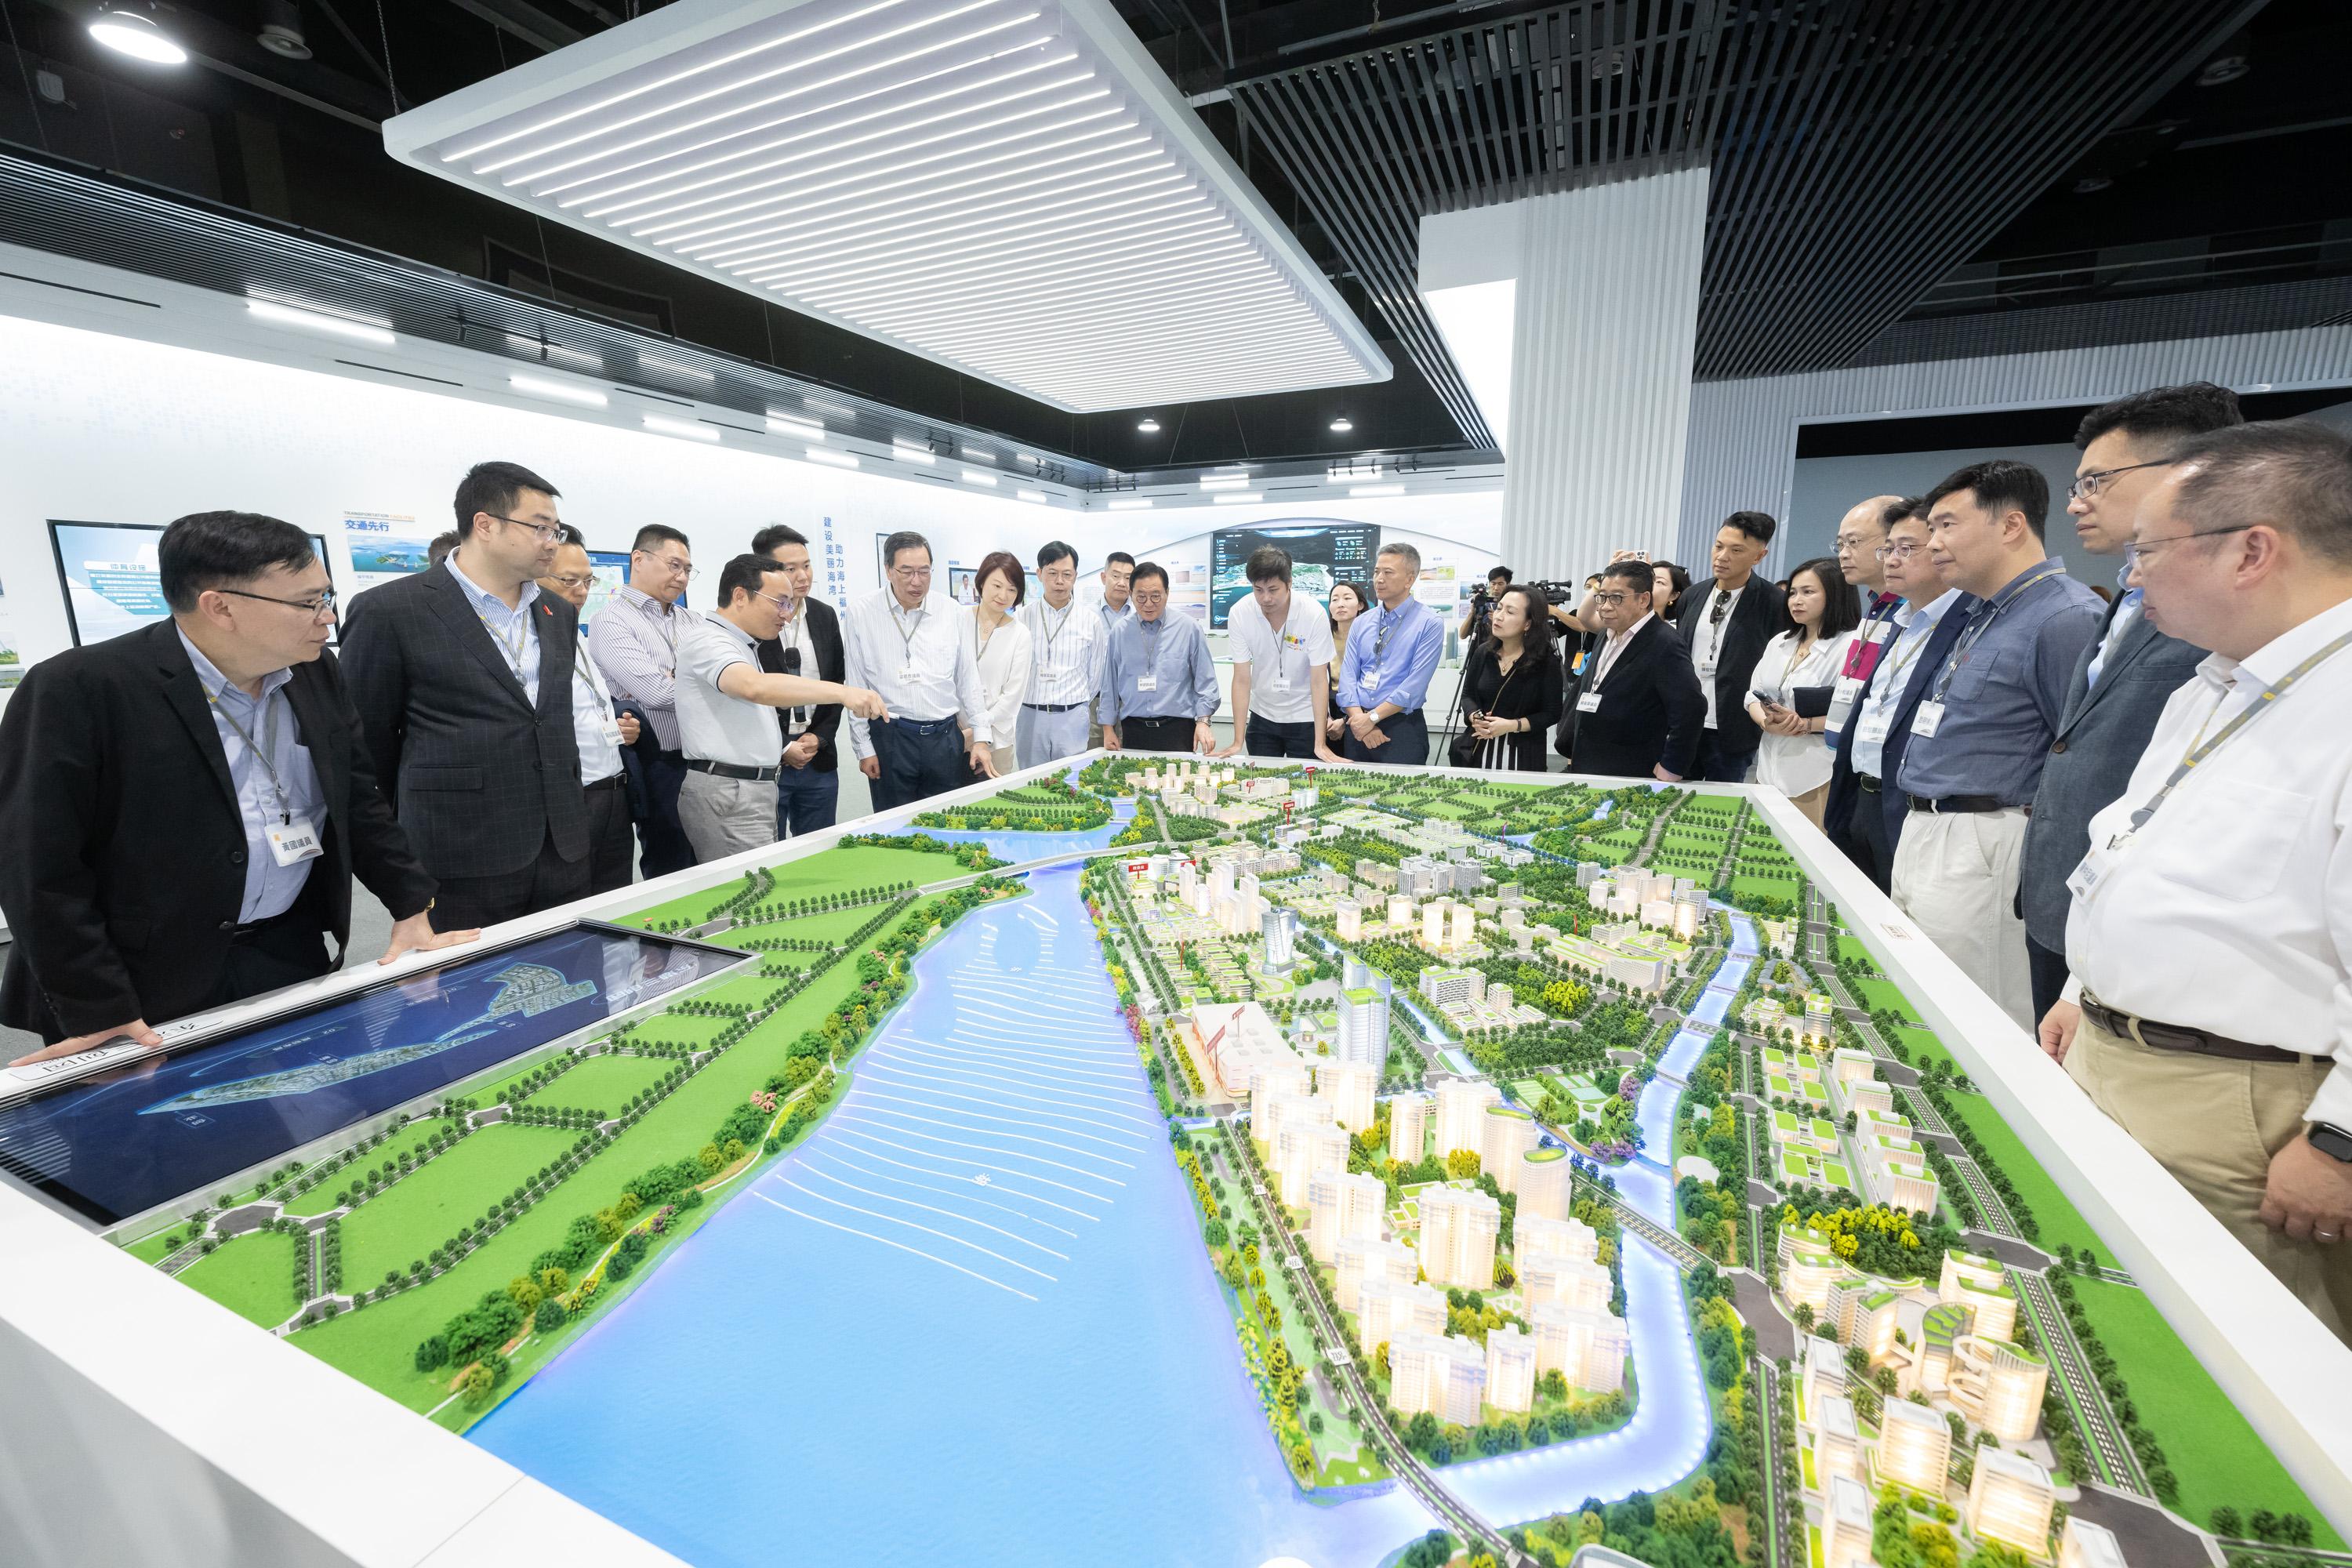 The Legislative Council (LegCo) delegation begins the five-day study visit in Fujian province today (July 15). Photo shows the delegation visits Bin Hai Xin Cheng Planning Exhibition Hall.